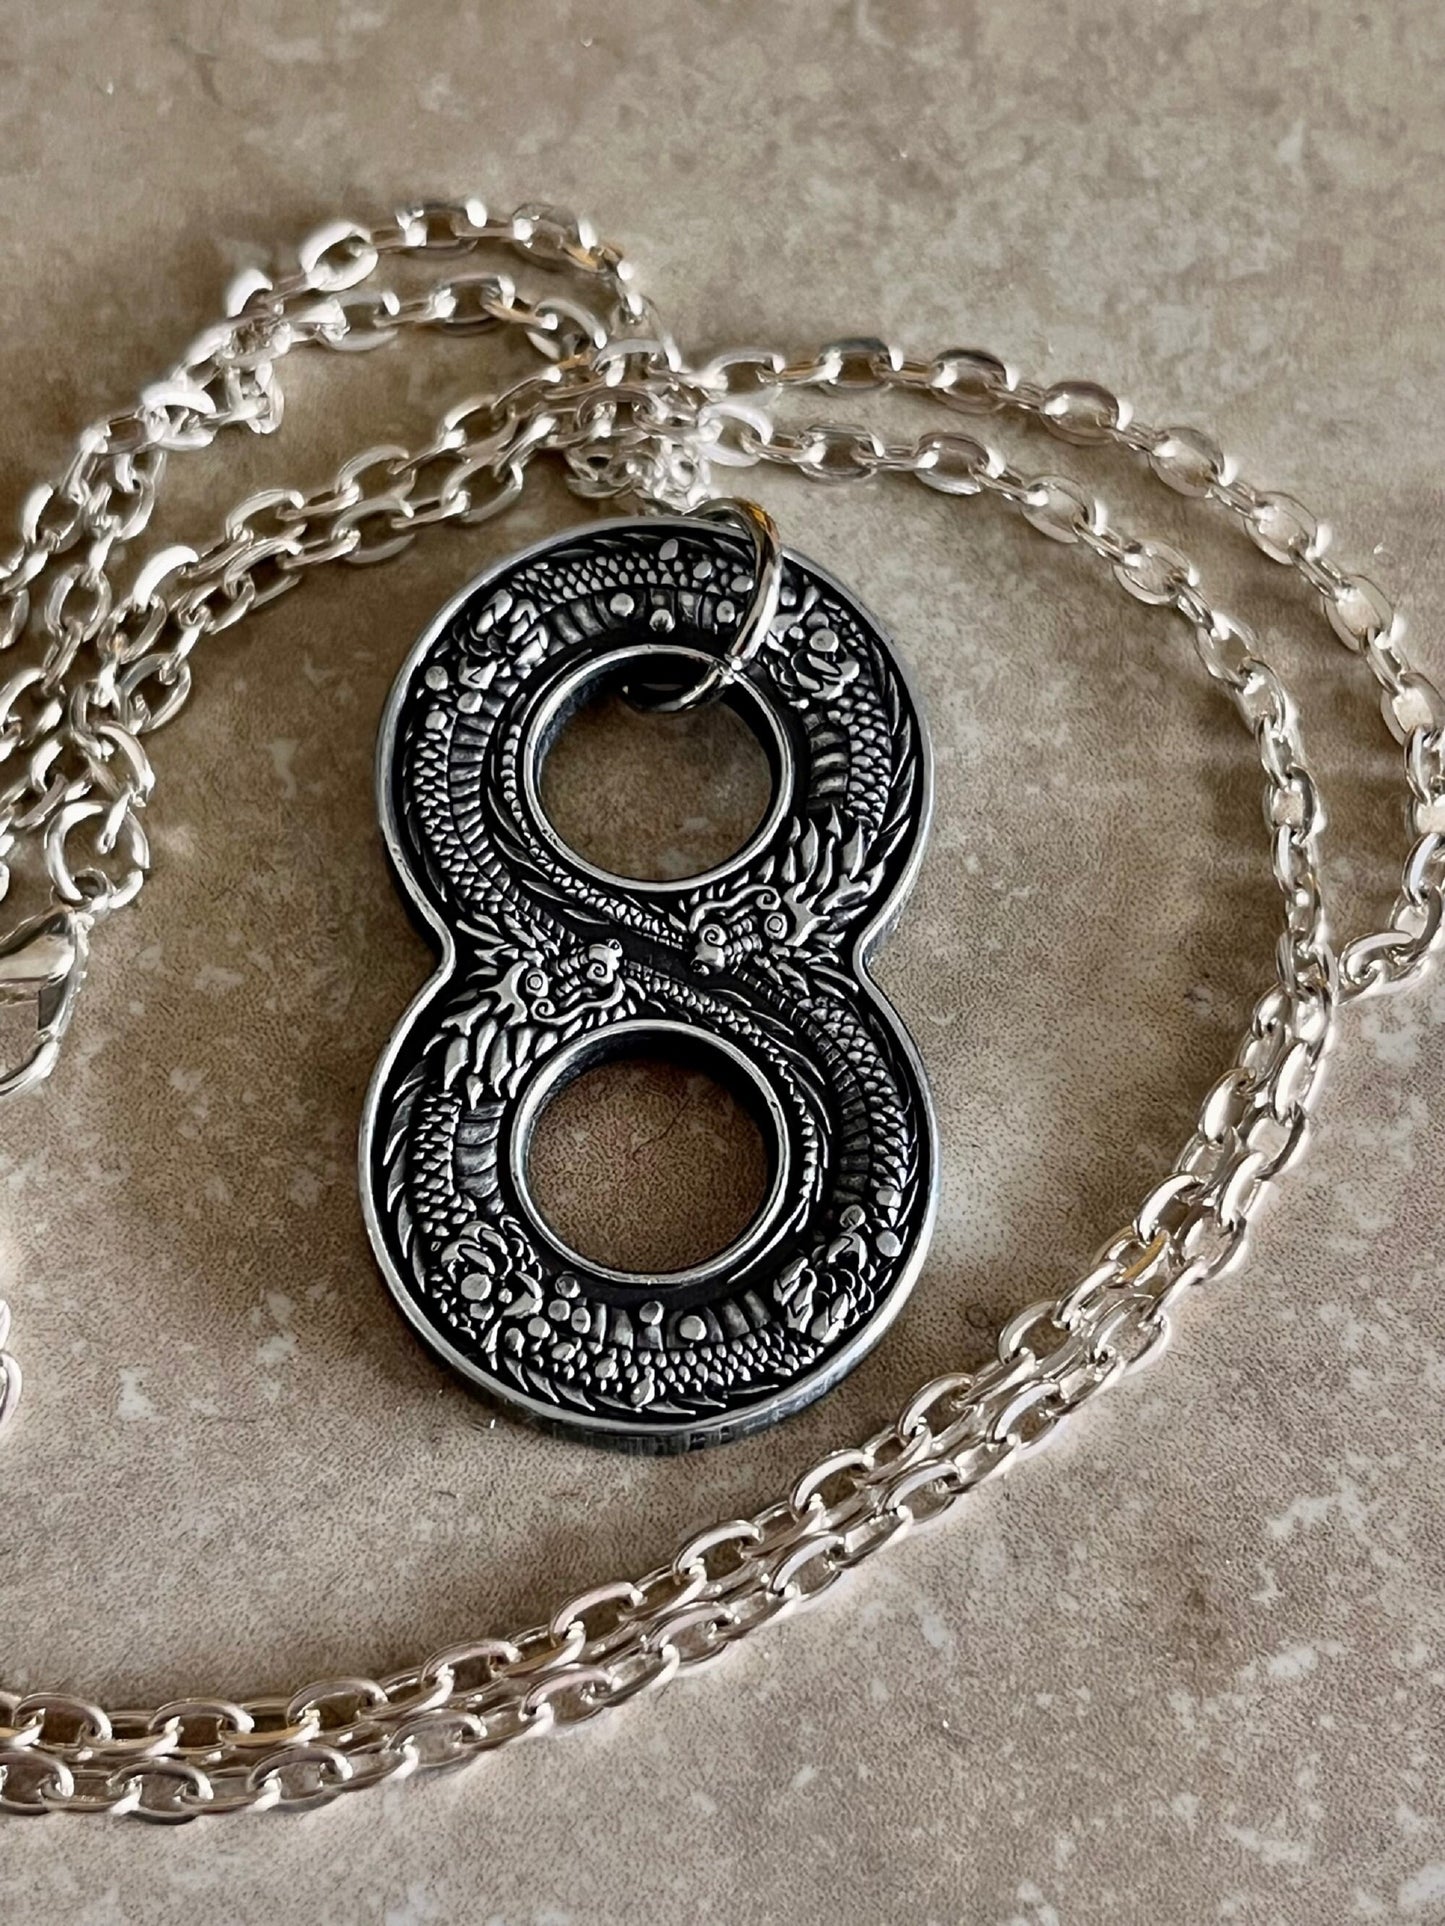 Chinese Lucky Dragon Infinity Dollar Coin Necklace Personal Old Vintage Handmade Jewelry Gift Friend Charm For Him Her World Coin Collector